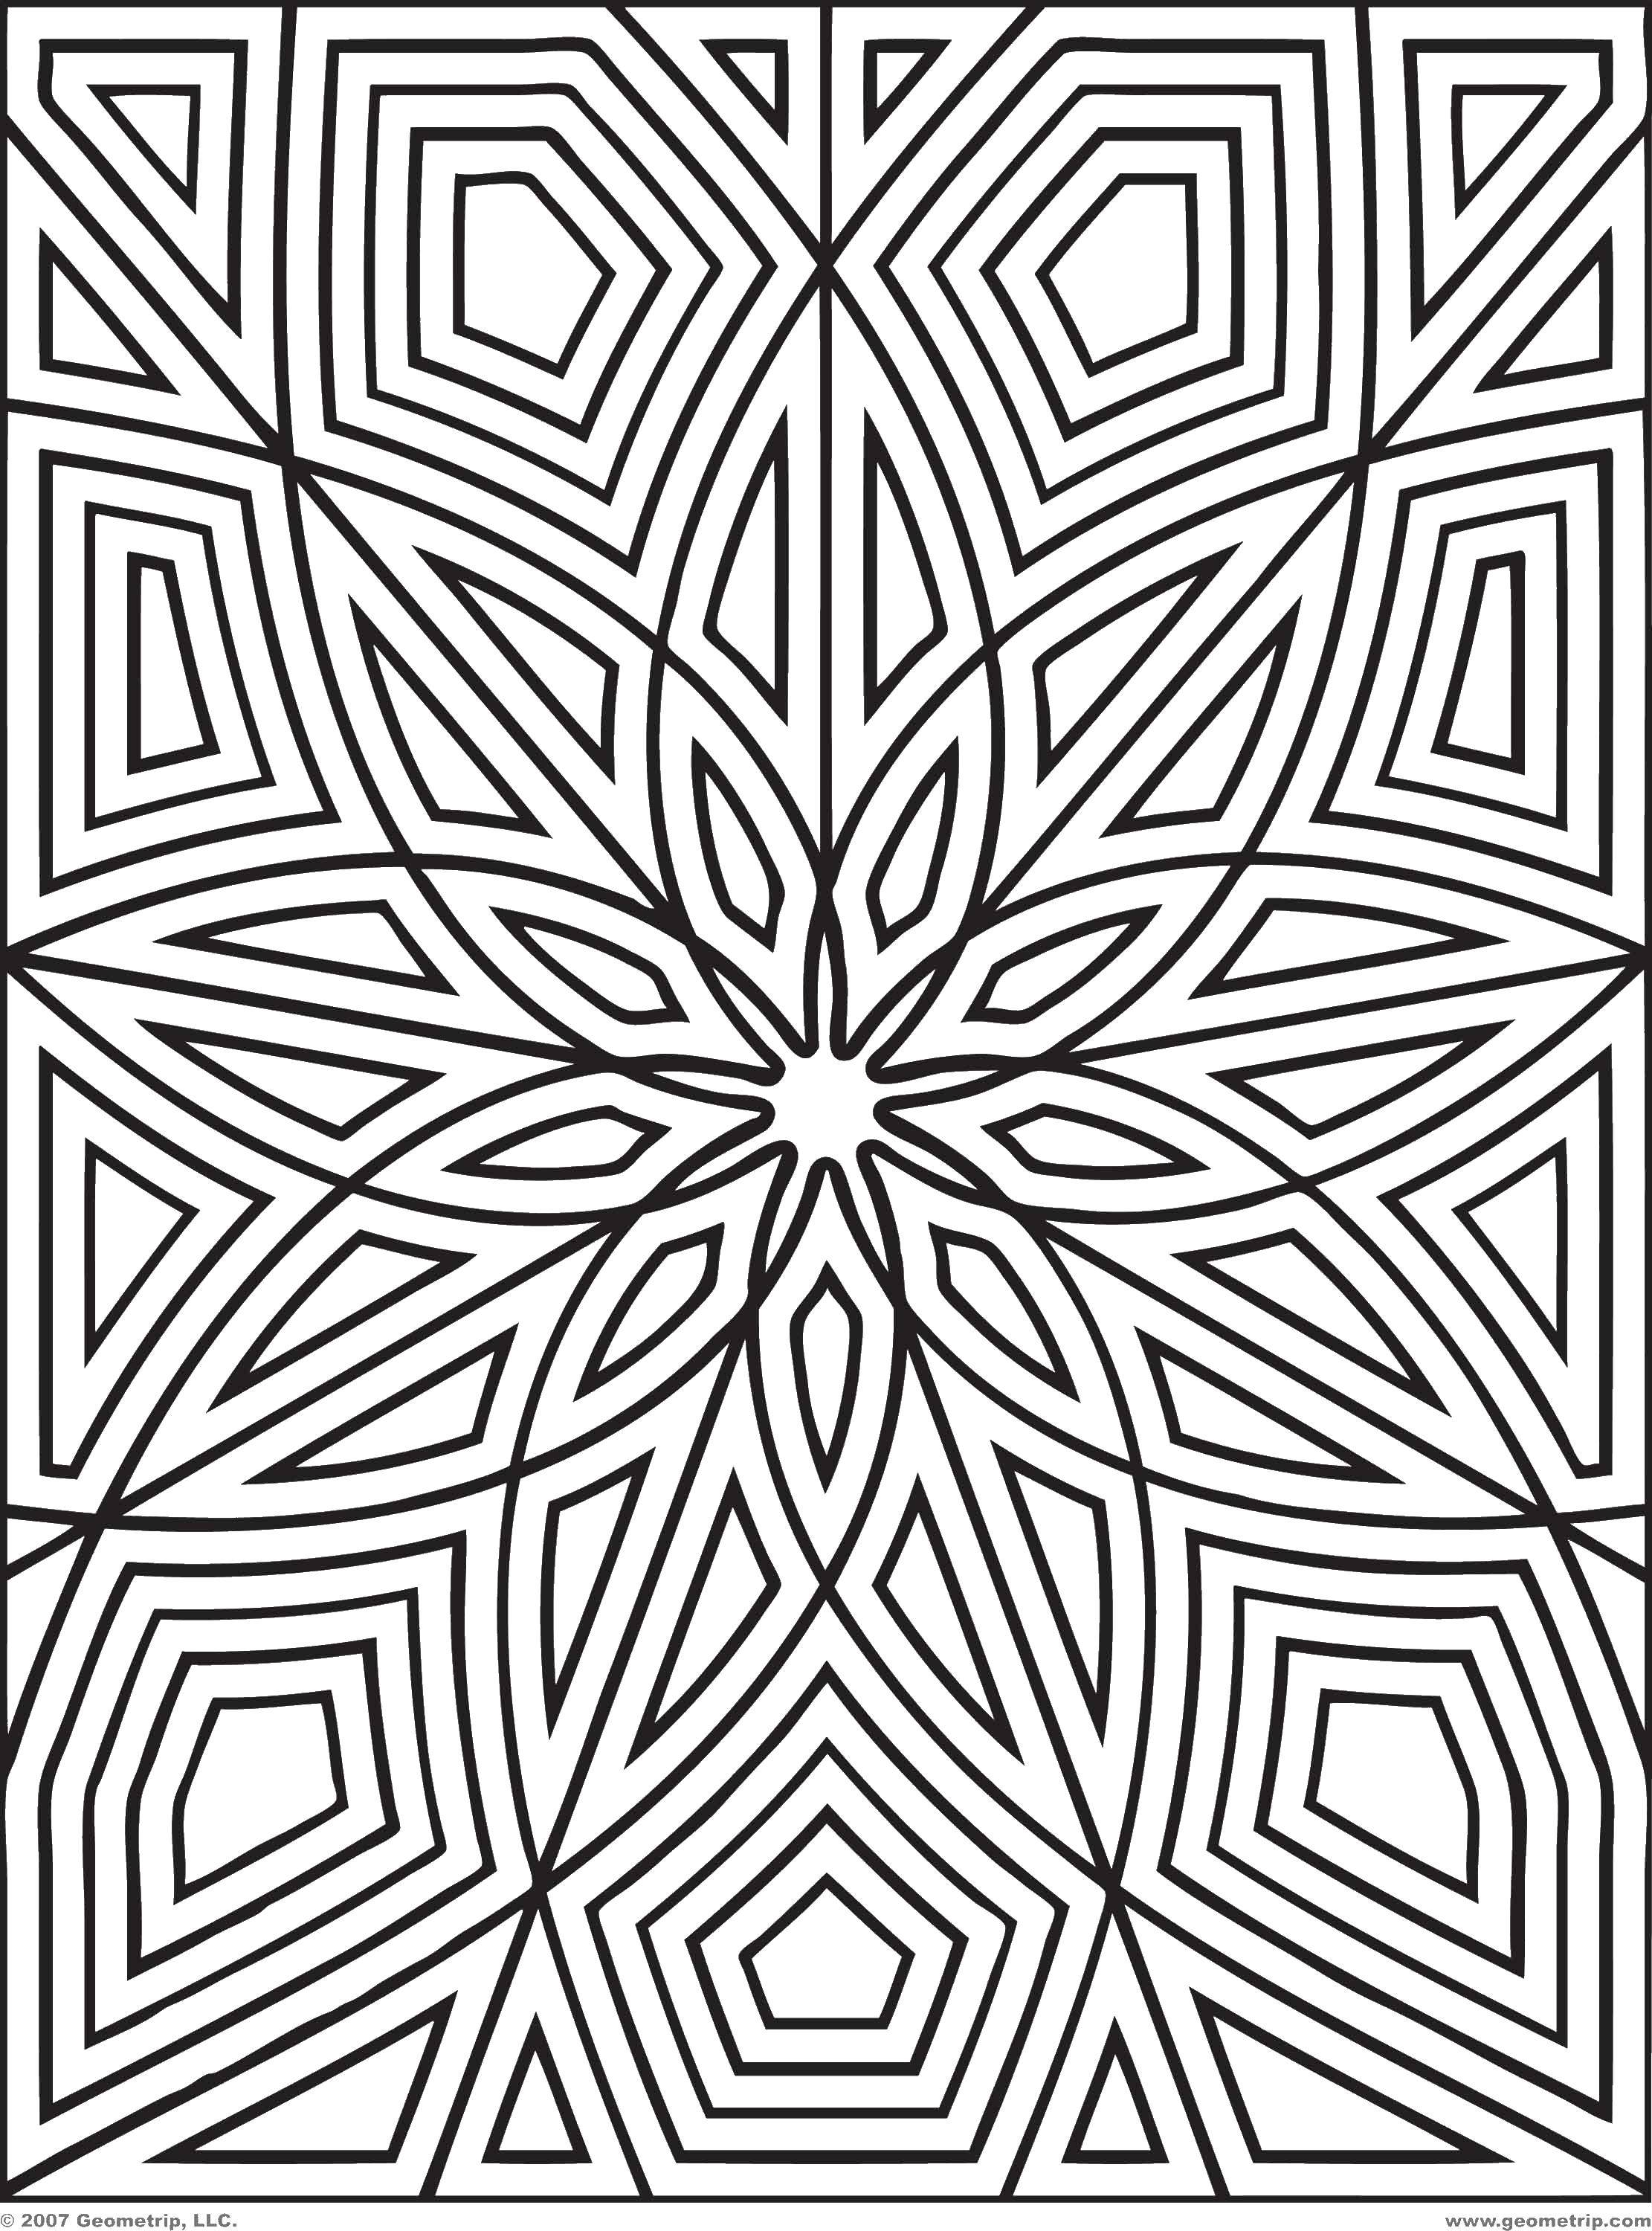 Coloring Ornament pattern patterns. Category Patterns with flowers. Tags:  patterns.